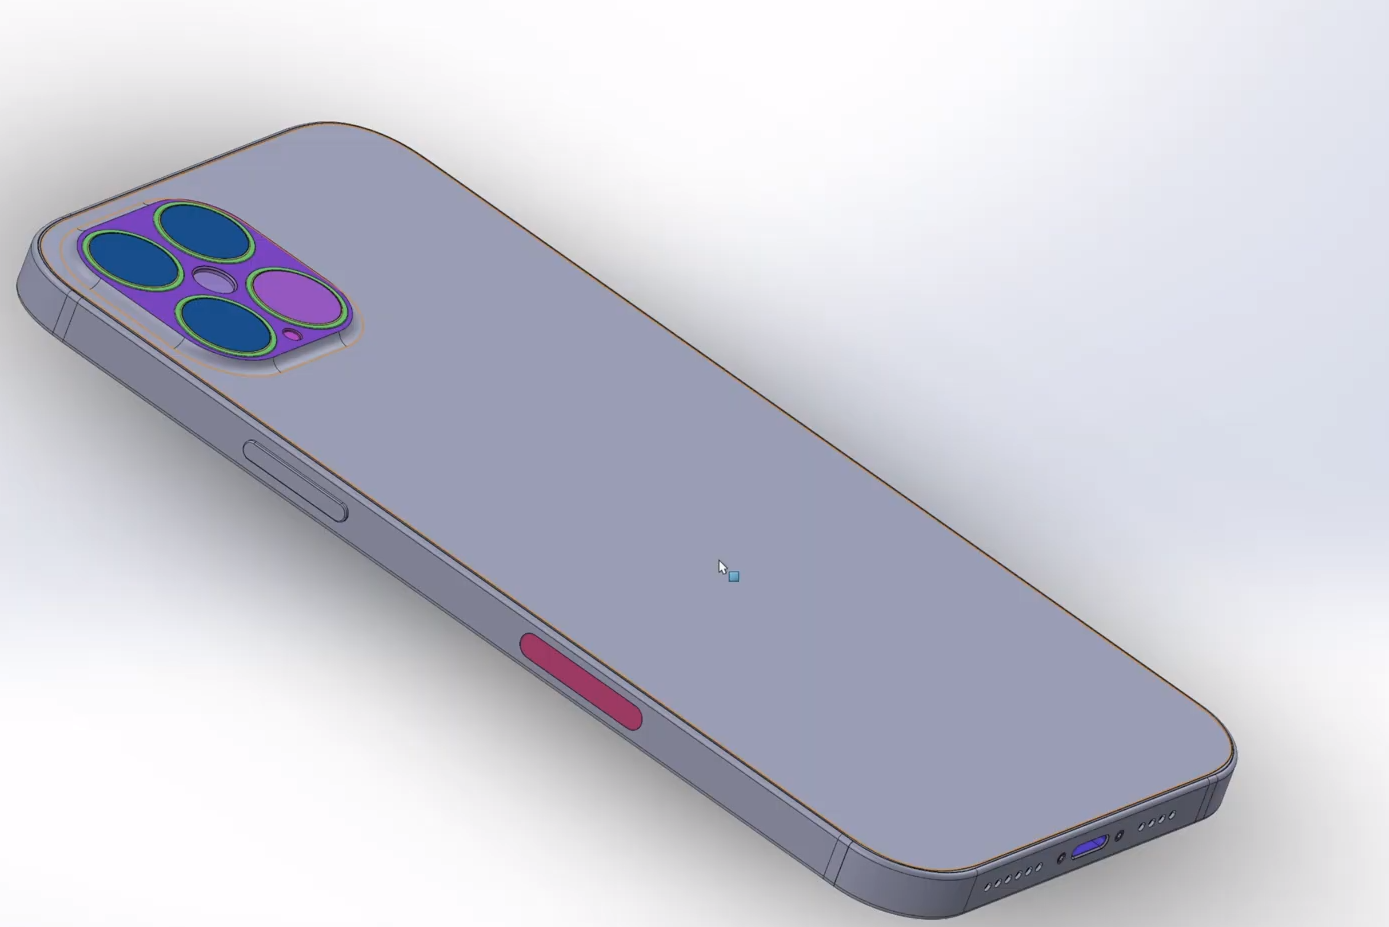 Apple iPhone 12 Pro Max CAD file (December 2019) - Don't expect iPhone 12 5G with Smart Connector or iPhone SE Plus in 2020